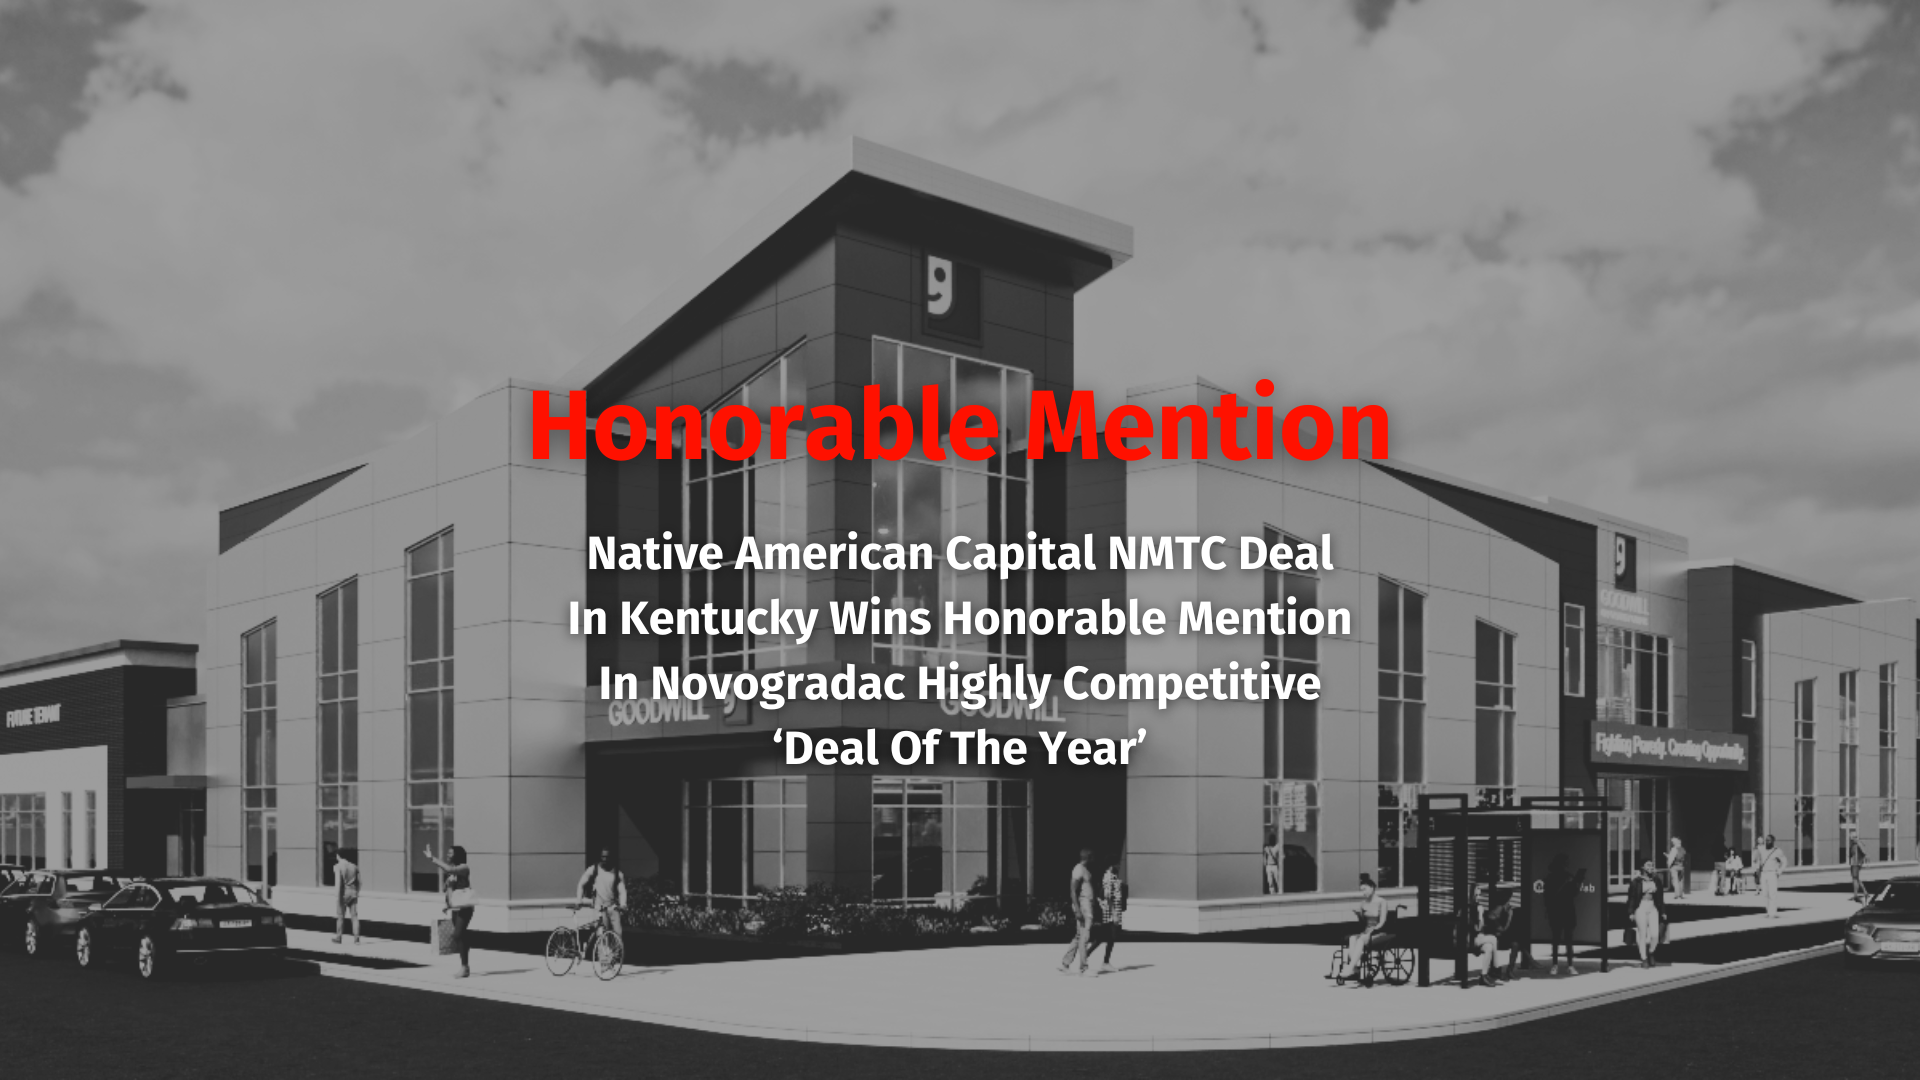 Native American Capital NMTC Deal In Kentucky Wins Honorable Mention In Novogradac Highly Competitive ‘Deal Of The Year’